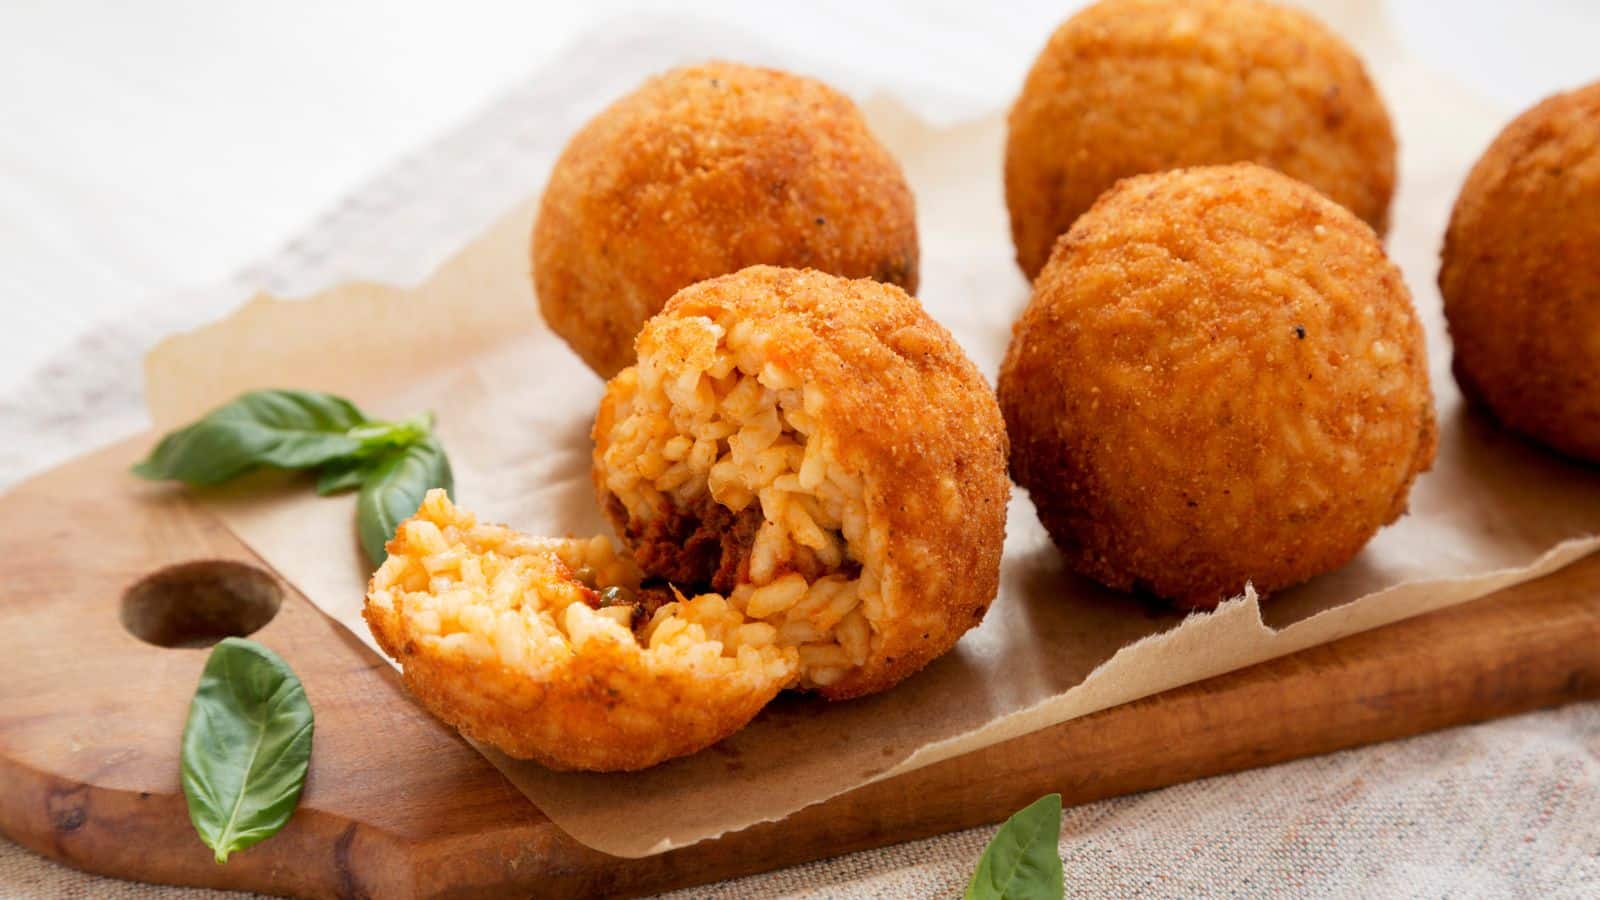 <p><span>Arancini are fried rice balls stuffed with cheese, meat, or vegetable fillings. They originated in Sicily but can now be found throughout Italy. They are often sold as quick and filling street food. These crispy and flavorful snacks are perfect for on-the-go eating.</span></p><p><span>The beauty of arancini lies not only in its satisfying crunch and the burst of flavors with each bite but also in how it represents Italy’s resourcefulness and creativity in food. The next time you find yourself in Italy, make sure to grab an arancini or two. </span></p>